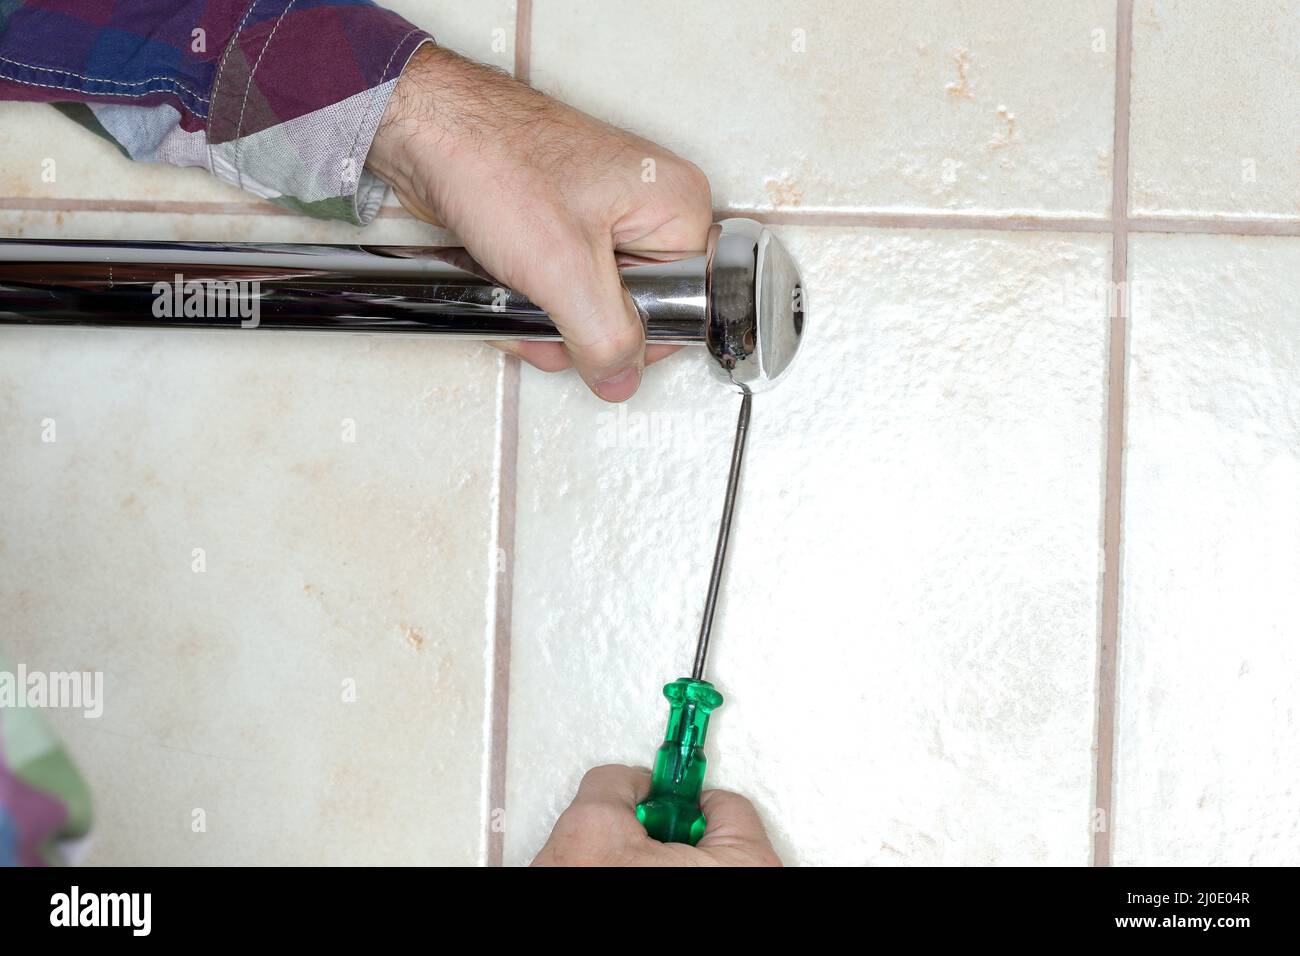 Worker is mounting a towel holder on a wall Stock Photo